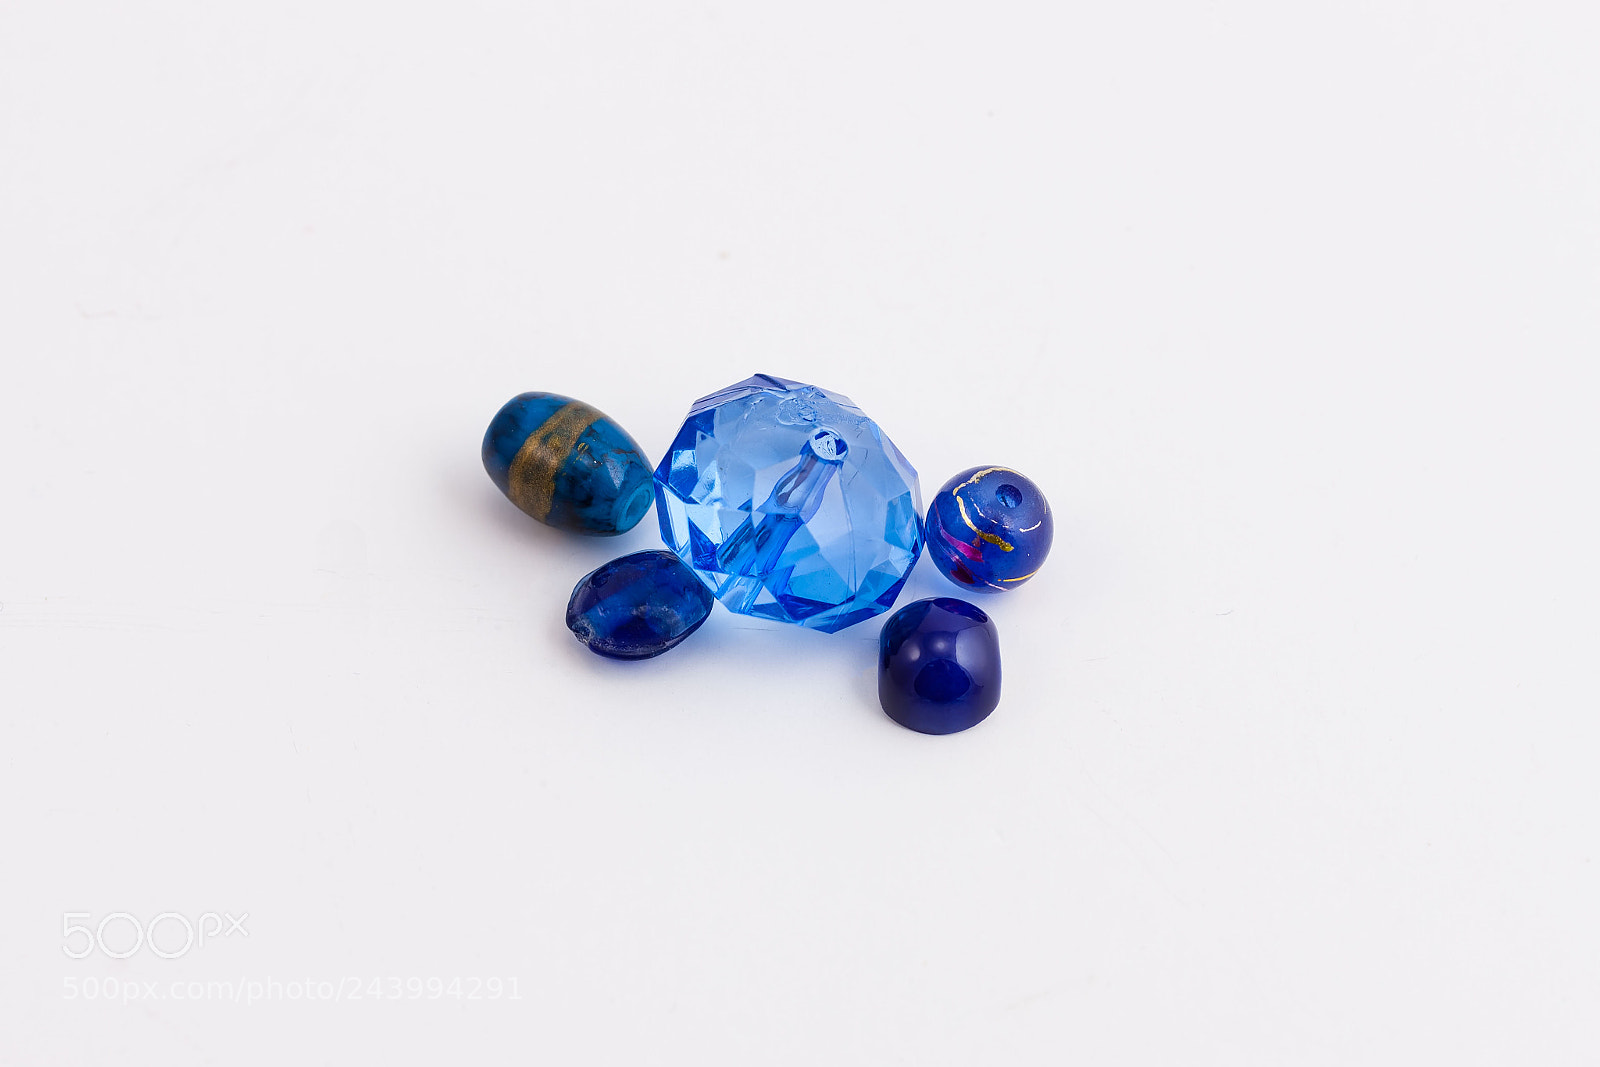 Canon EOS-1Ds Mark III sample photo. Five blue beads of photography